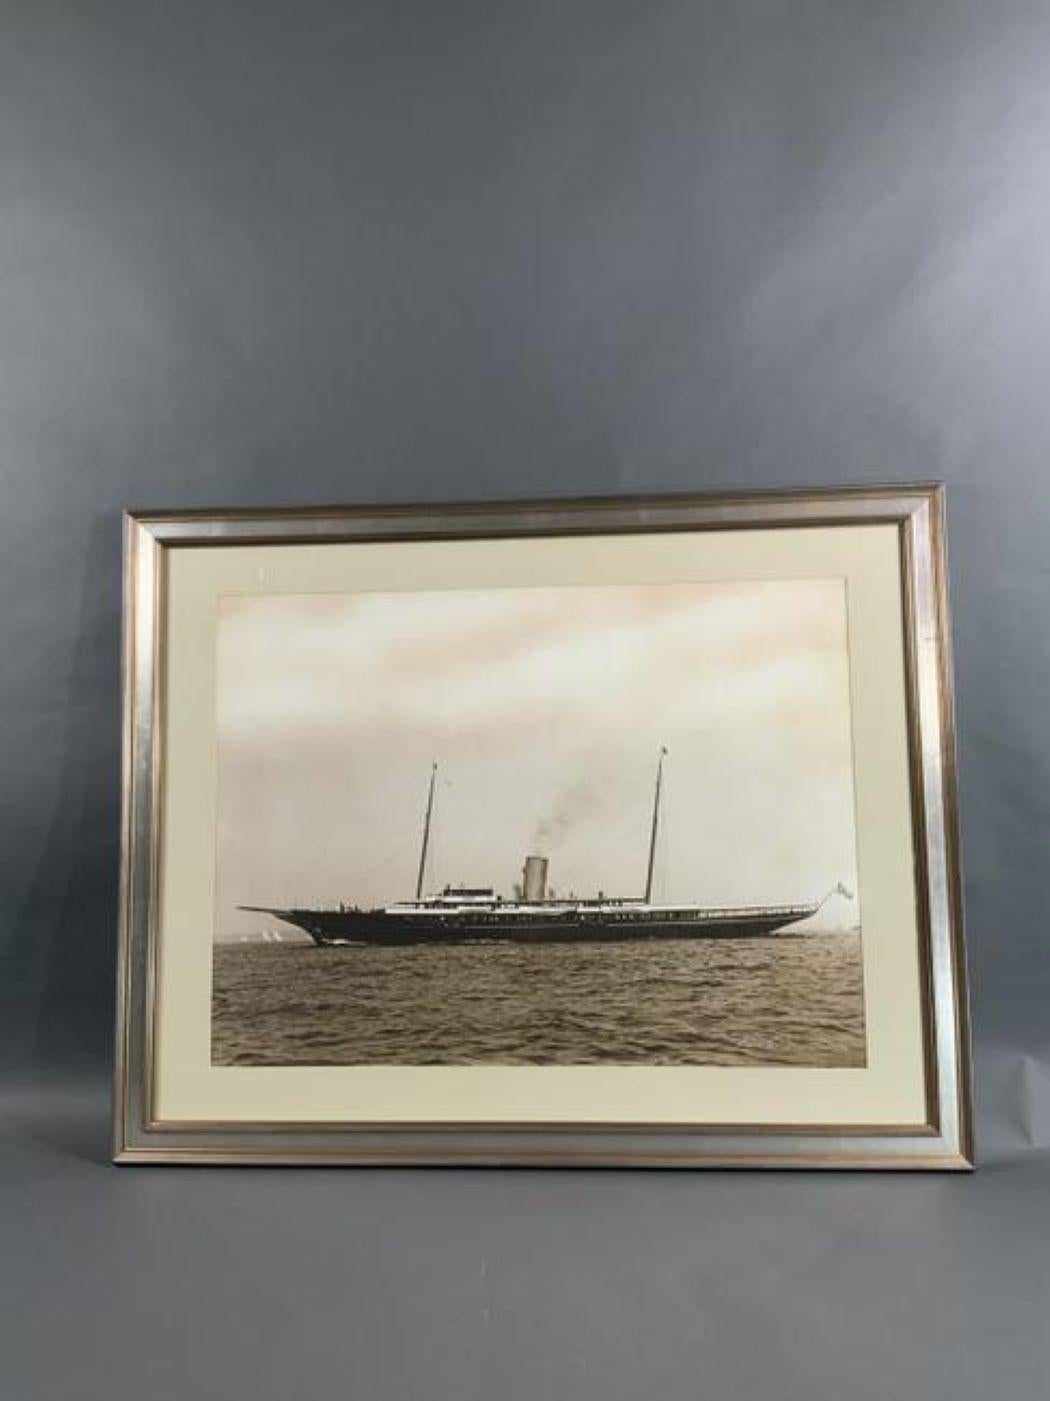 Framed Edwin Levick print of JP Morgan's private yacht Corsair IV. Stunning profile of the vessel which was the flagship of the New York Yacht Club. Matted and framed. Weight is 16 pounds. On Sight Dimensions: 24